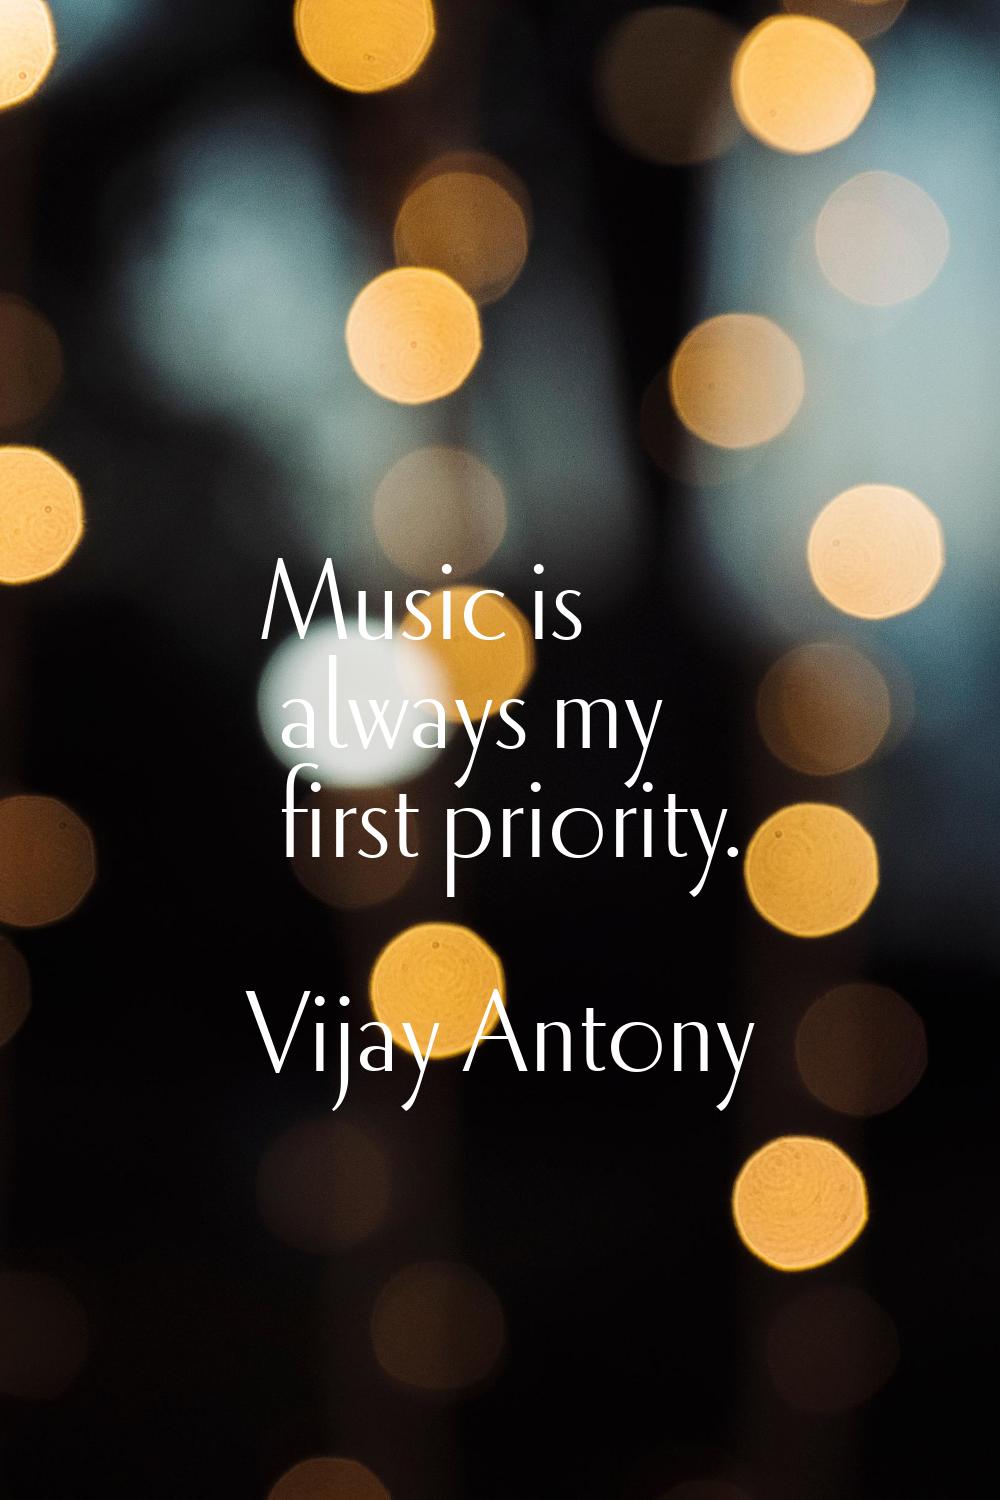 Music is always my first priority.